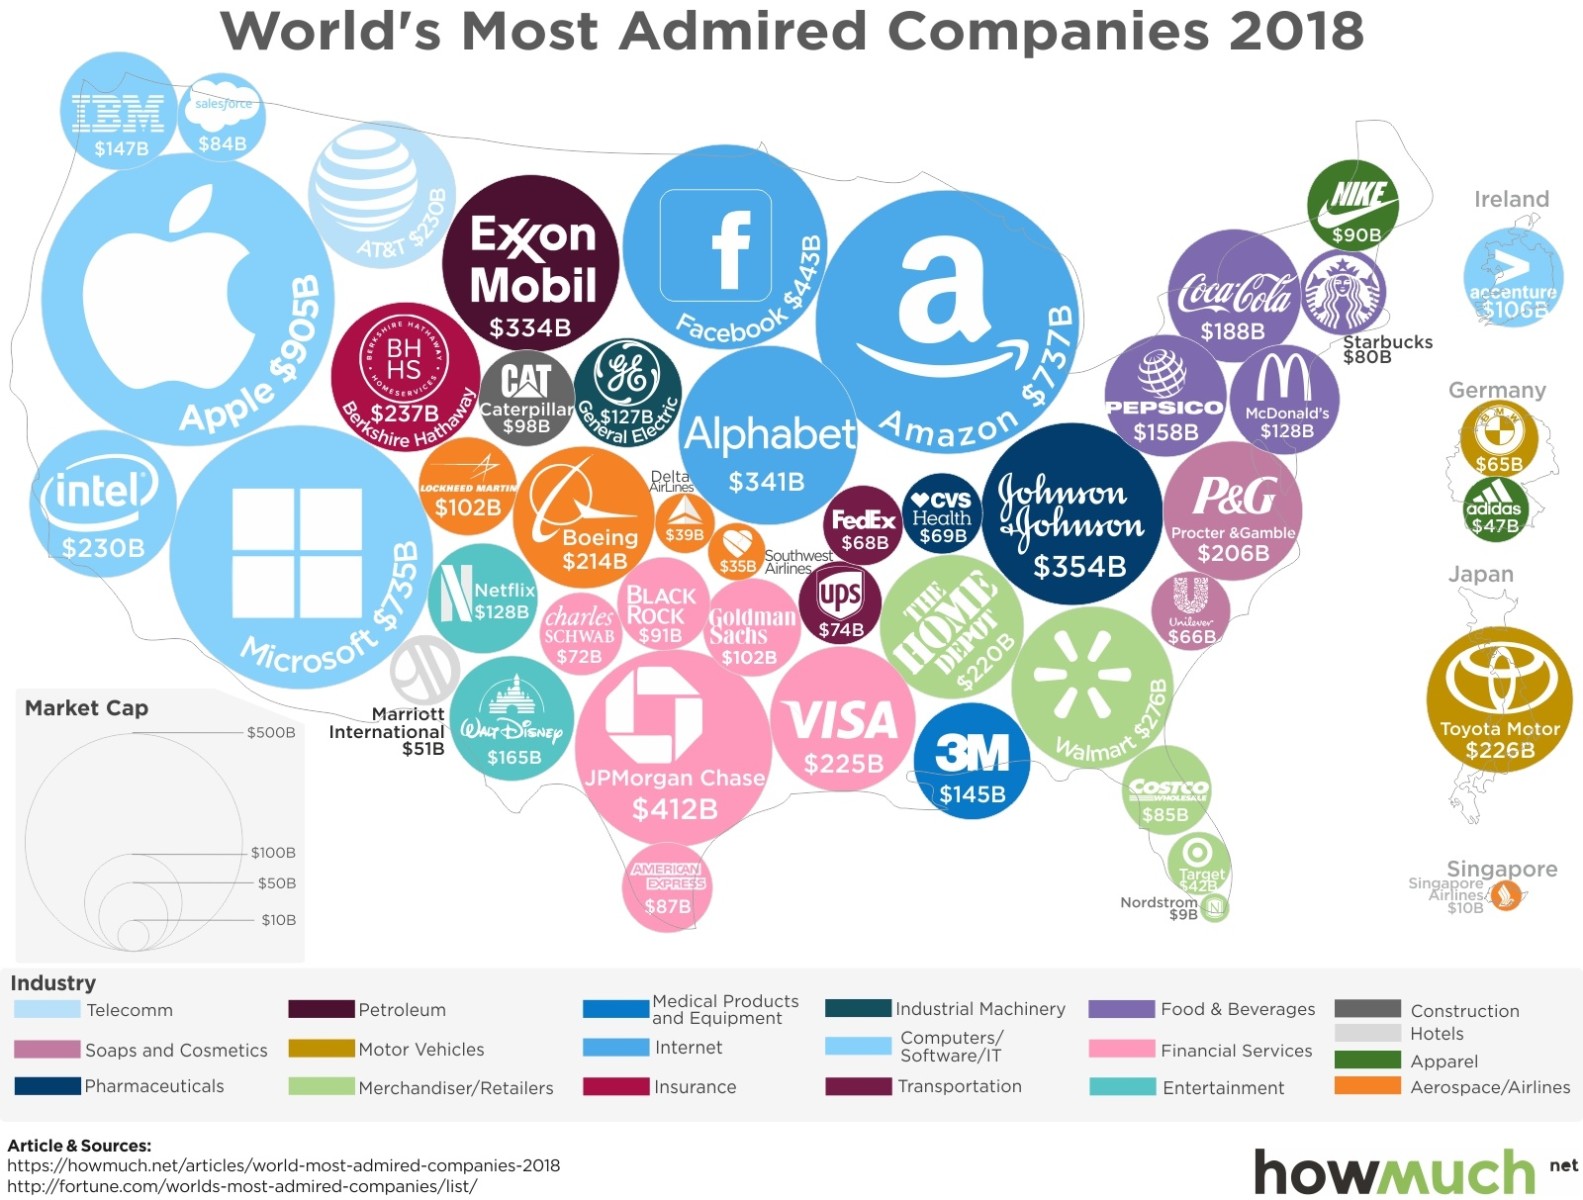 World's Most Admired Companies, Confusing Map Edition - The Big Picture